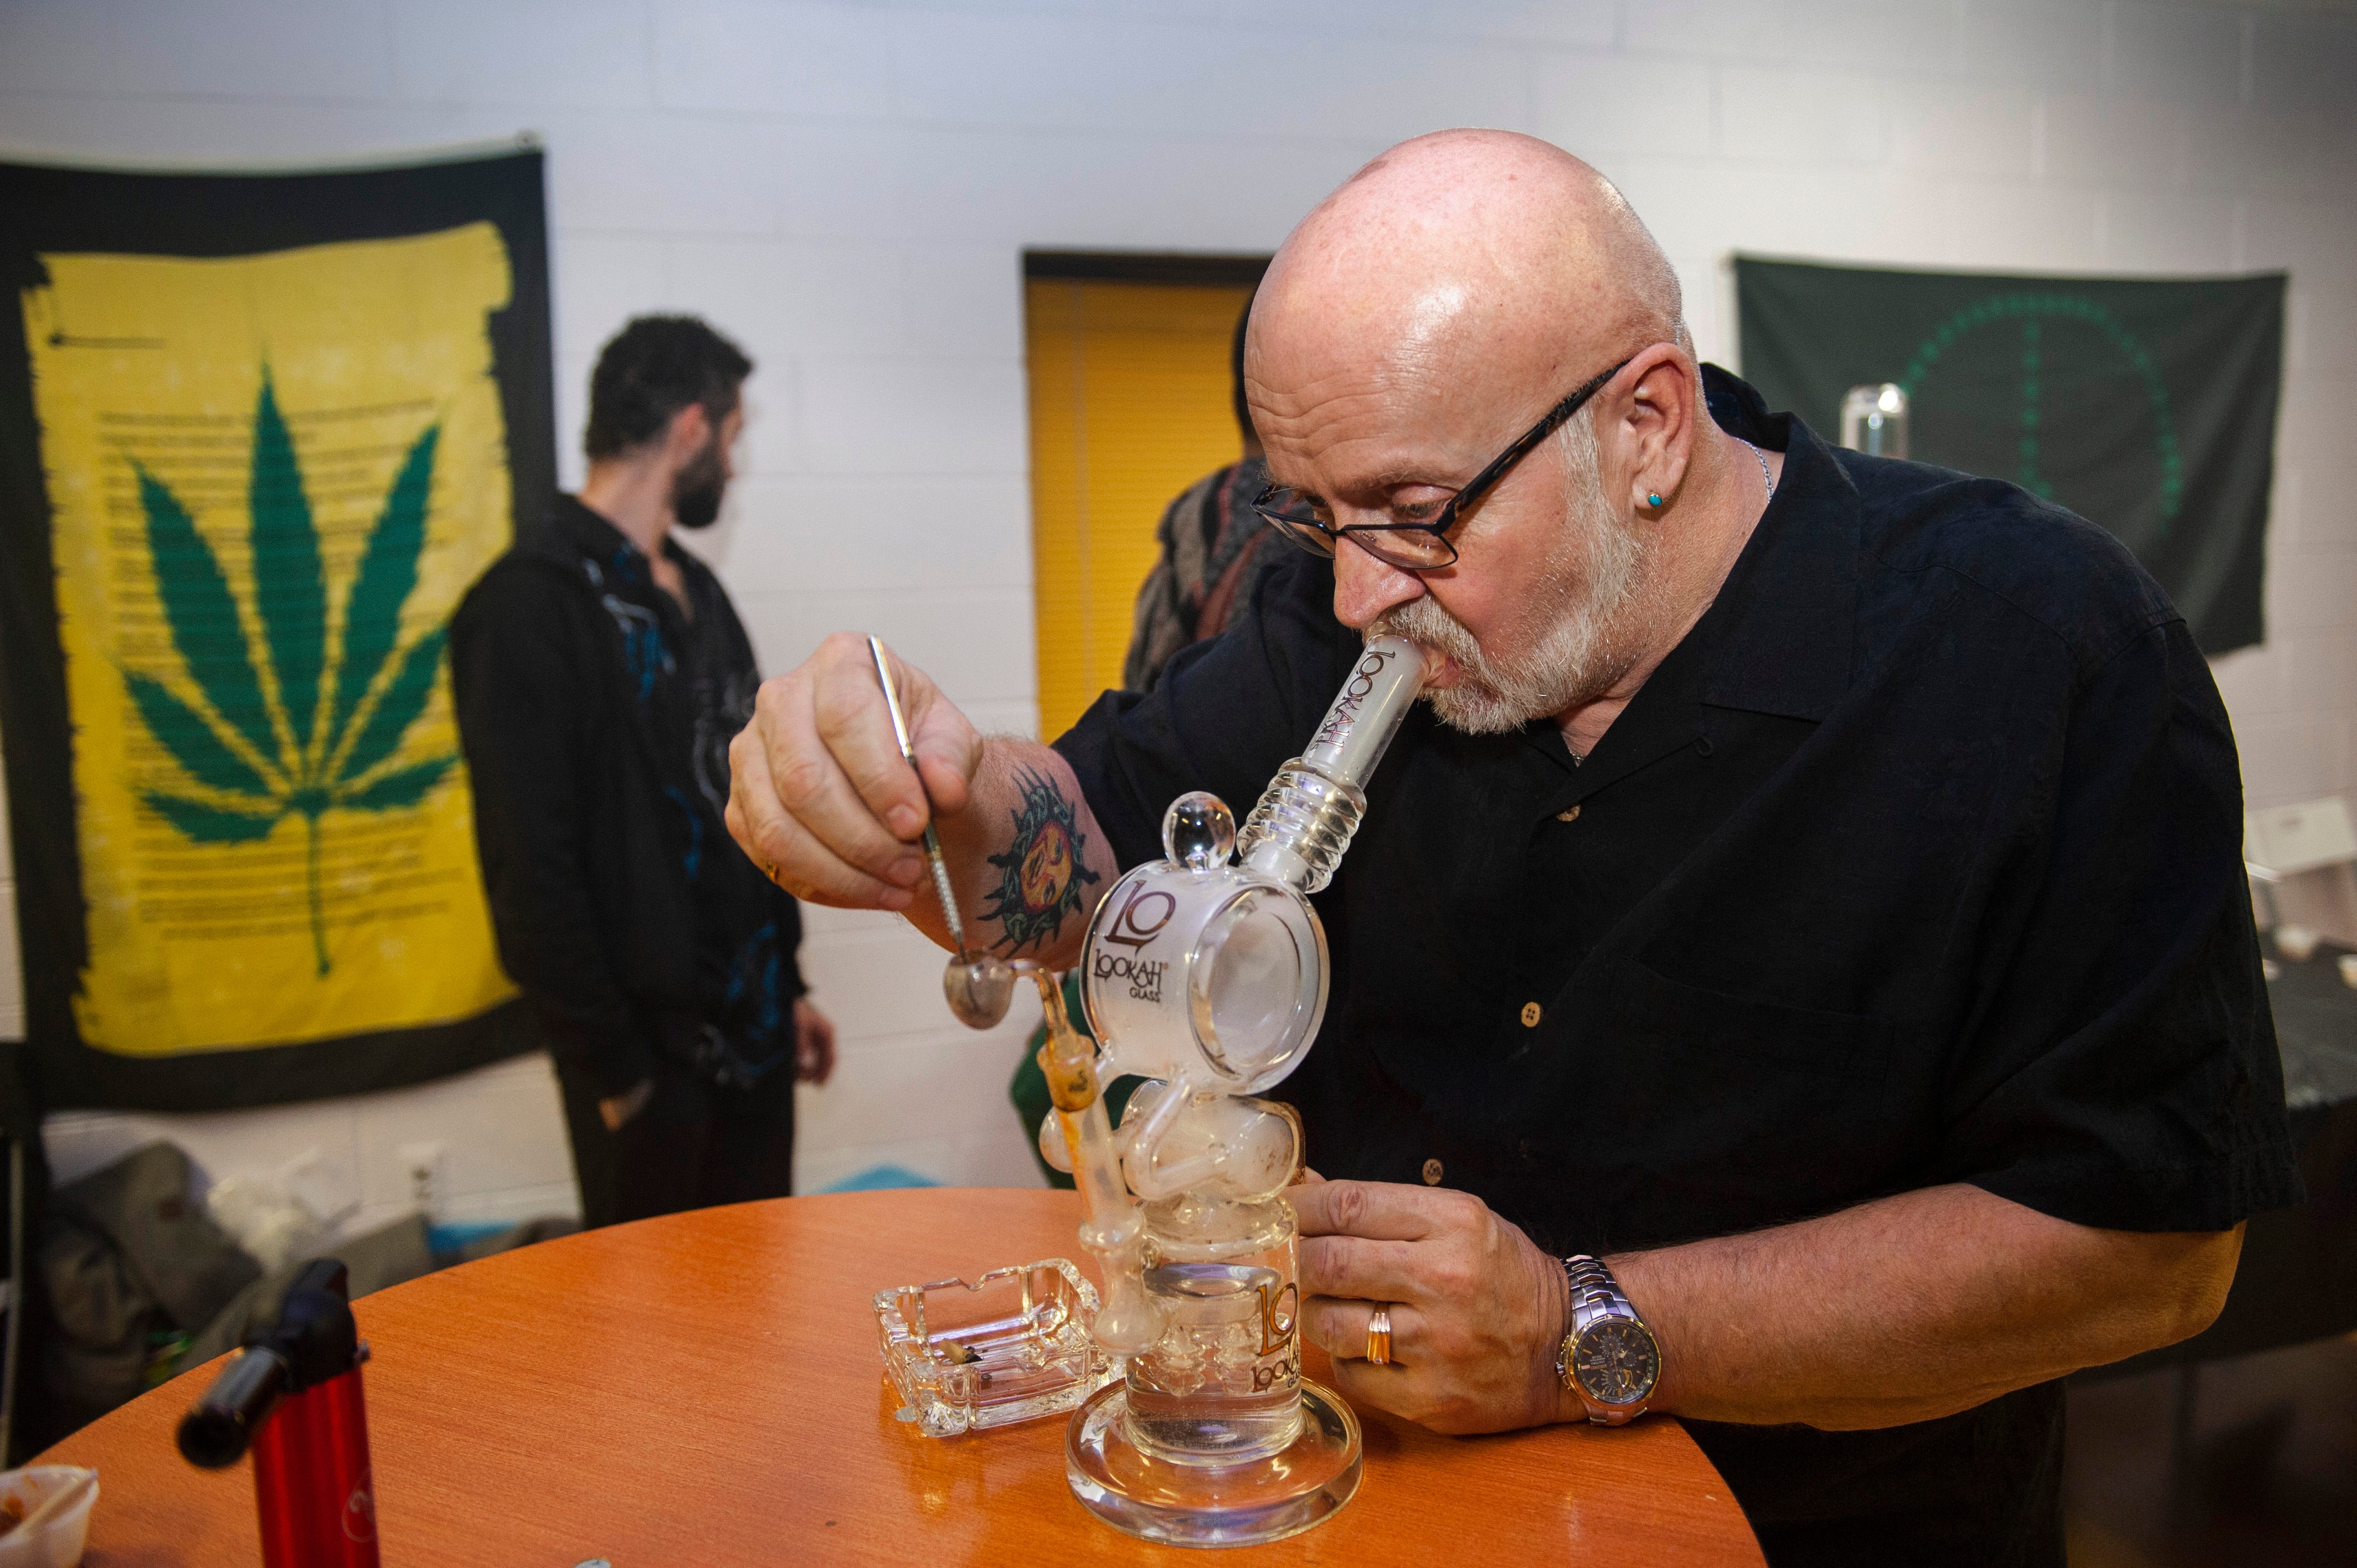 Don Short, 61, of Holland, Michigan, a medical marijuana card-holder and longtime marijuana user, smokes a condensed form of THC called "shatter" from a glass bong. Short's daughter, Erin Short, was the featured artist at "The Art of Cannabis" exhibition and tasting event at the Cannabis Counsel in Detroit. Erin Short's CCS senior thesis project explored the lives of Michigan medical marijuana patients and their preferred methods of using cannabis.